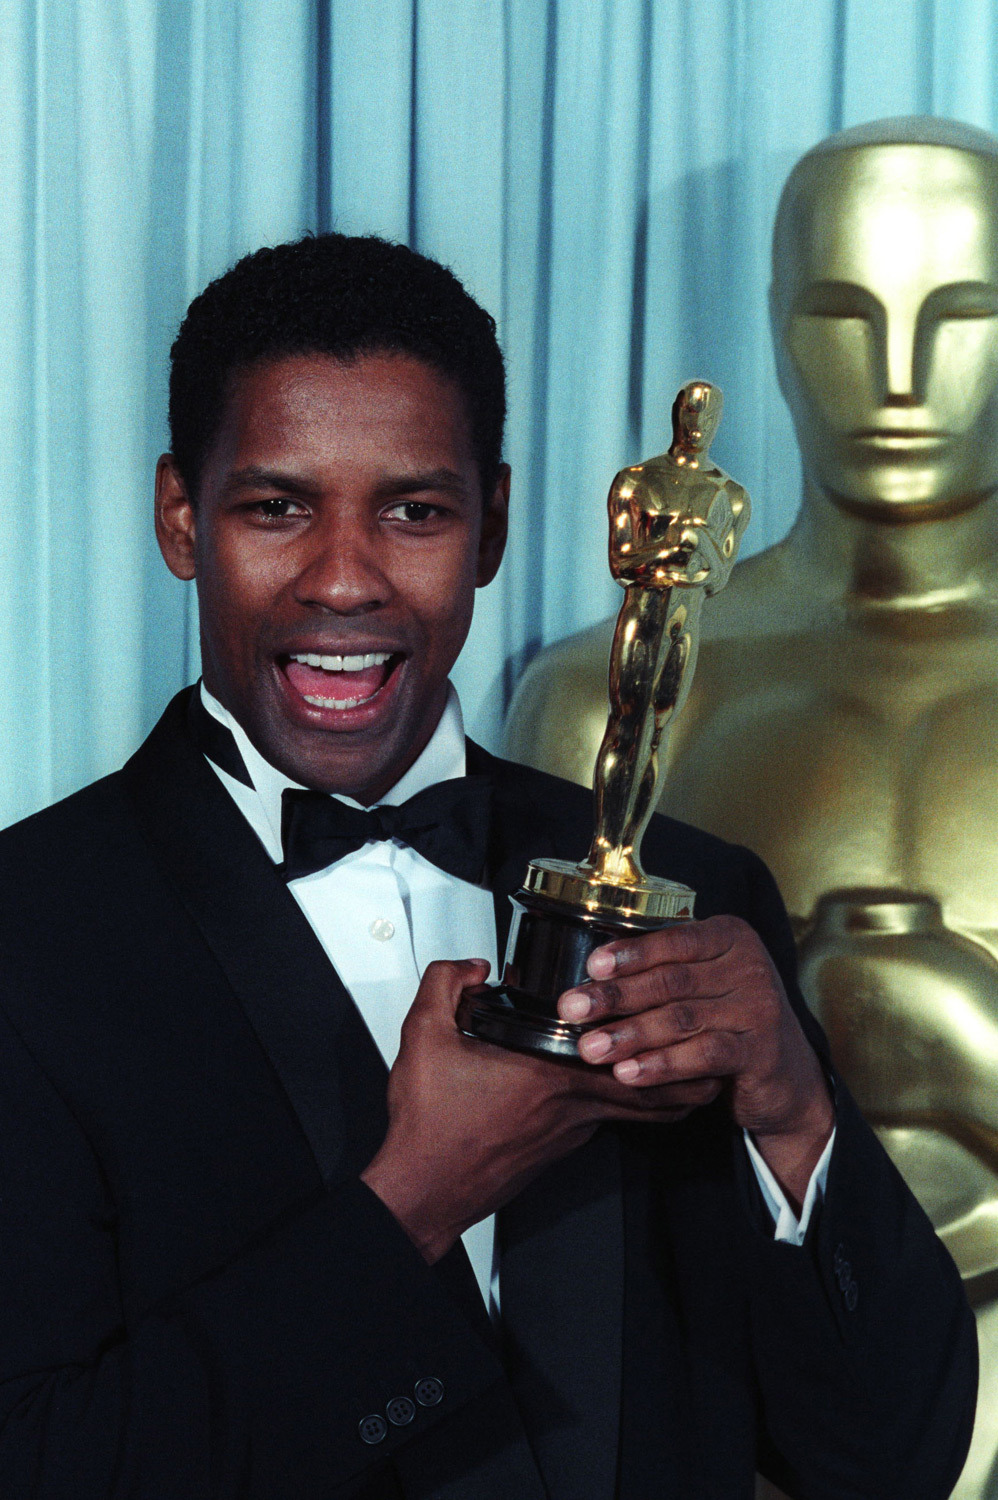  Two time Oscar winner Denzel Washington turns 60 today. He won best supporting actor